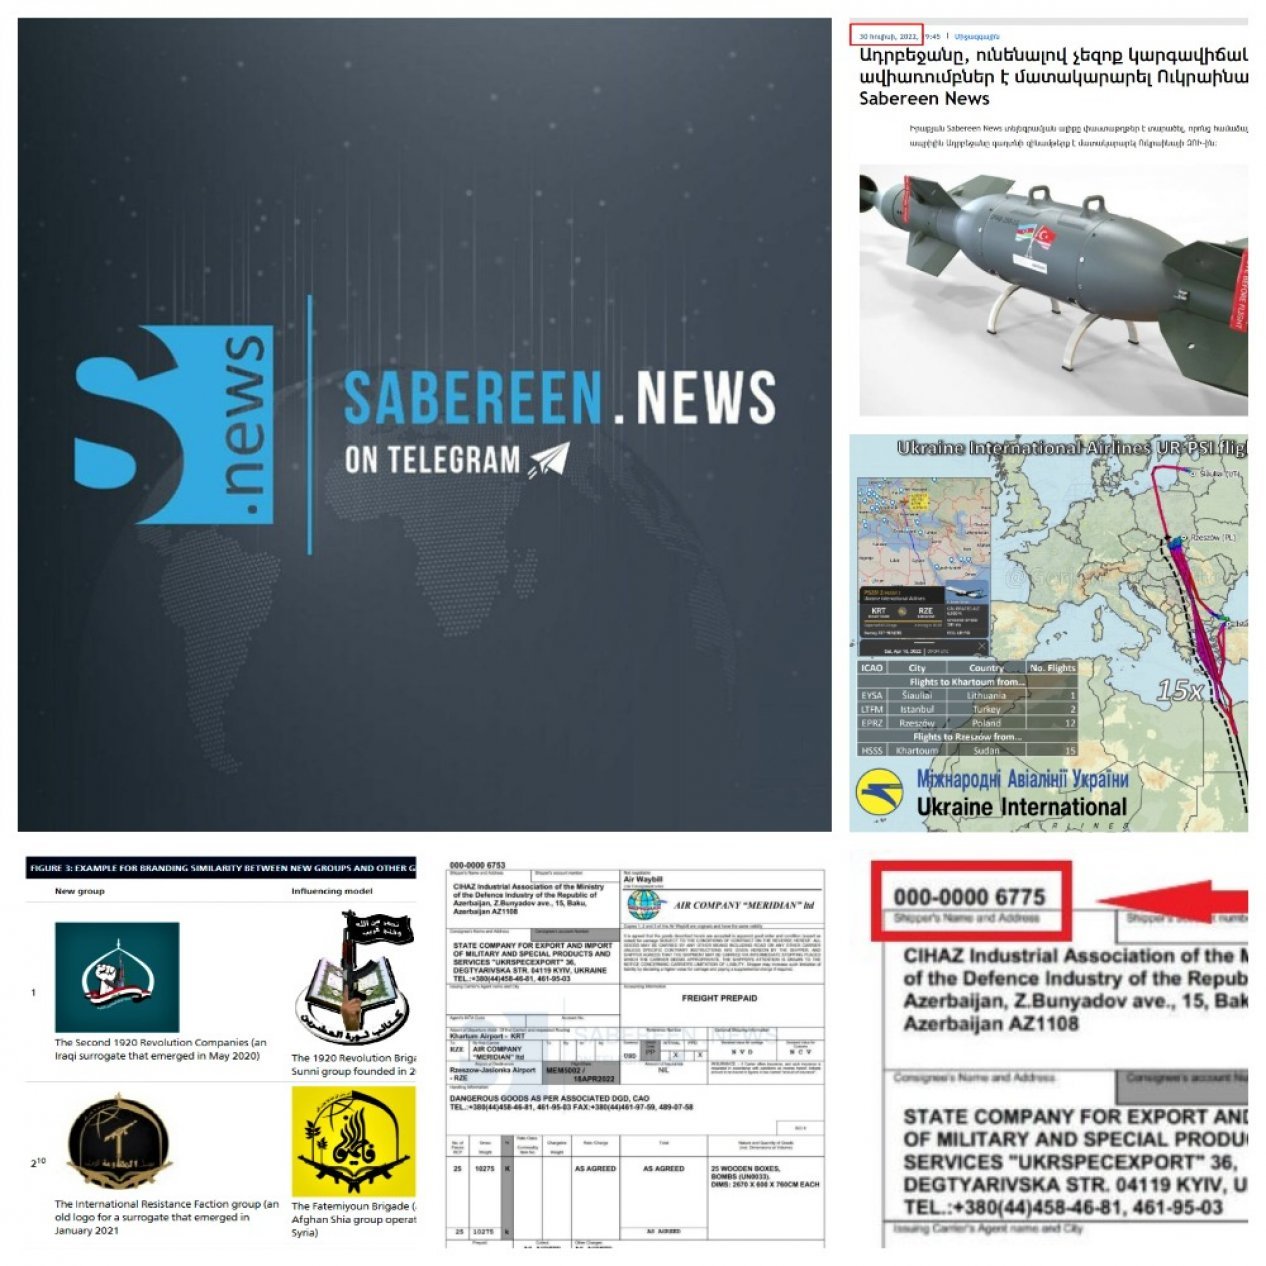 Reports of an Iraqi telegram channel about the shipment of weapons from Azerbaijan to Ukraine turned out to be fake - Our investigation